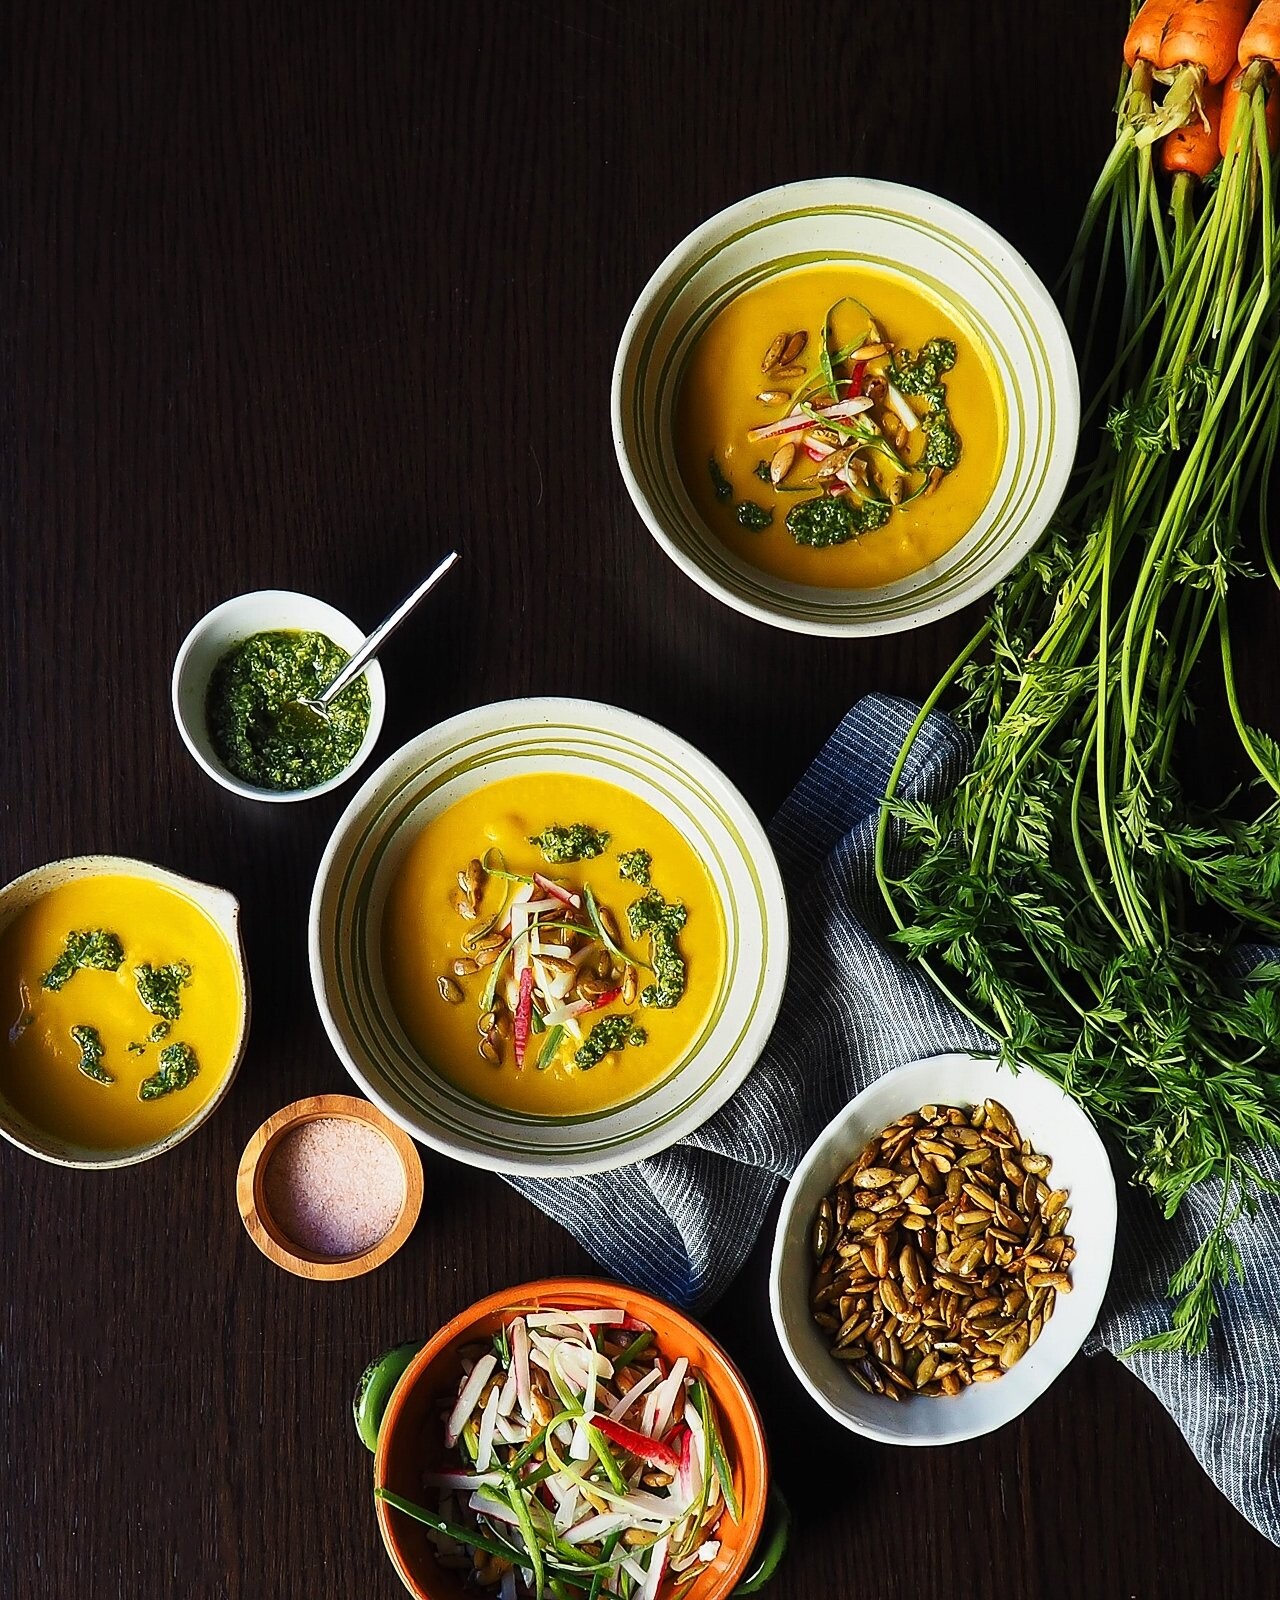 A cozy soup that nourishes and comforts. Creamy carrot soup with carrot top pesto made from fresh carrot leaves, radish salad topping and roasted pepitas for some crunch.